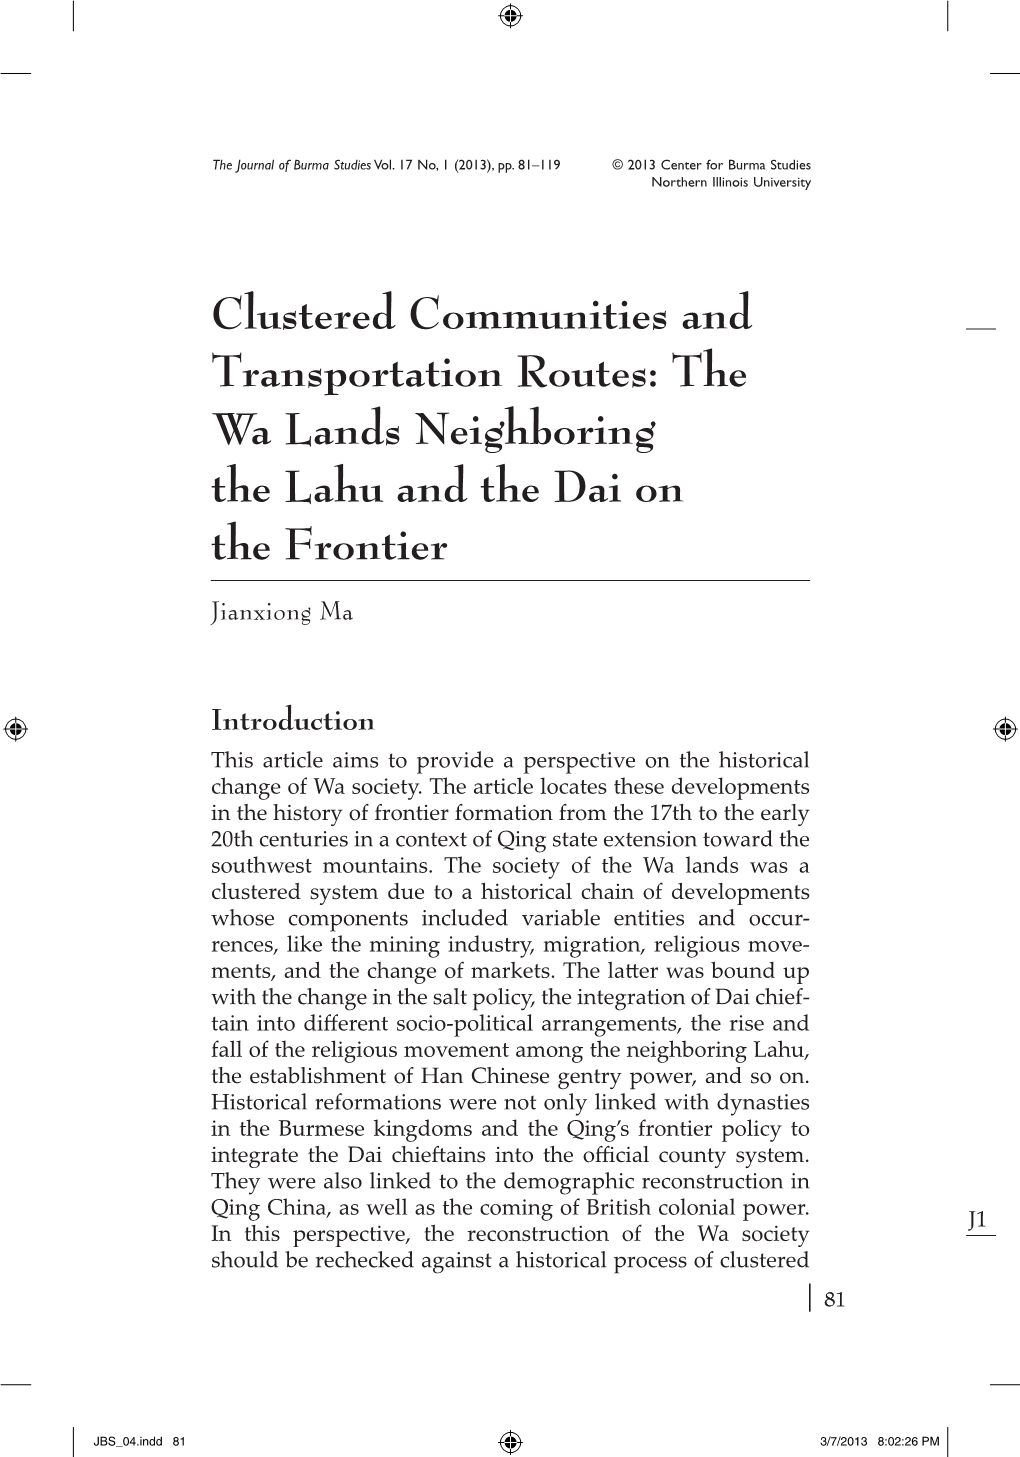 Clustered Communities and Transportation Routes: the Wa Lands Neighboring the Lahu and the Dai on the Frontier Jianxiong Ma